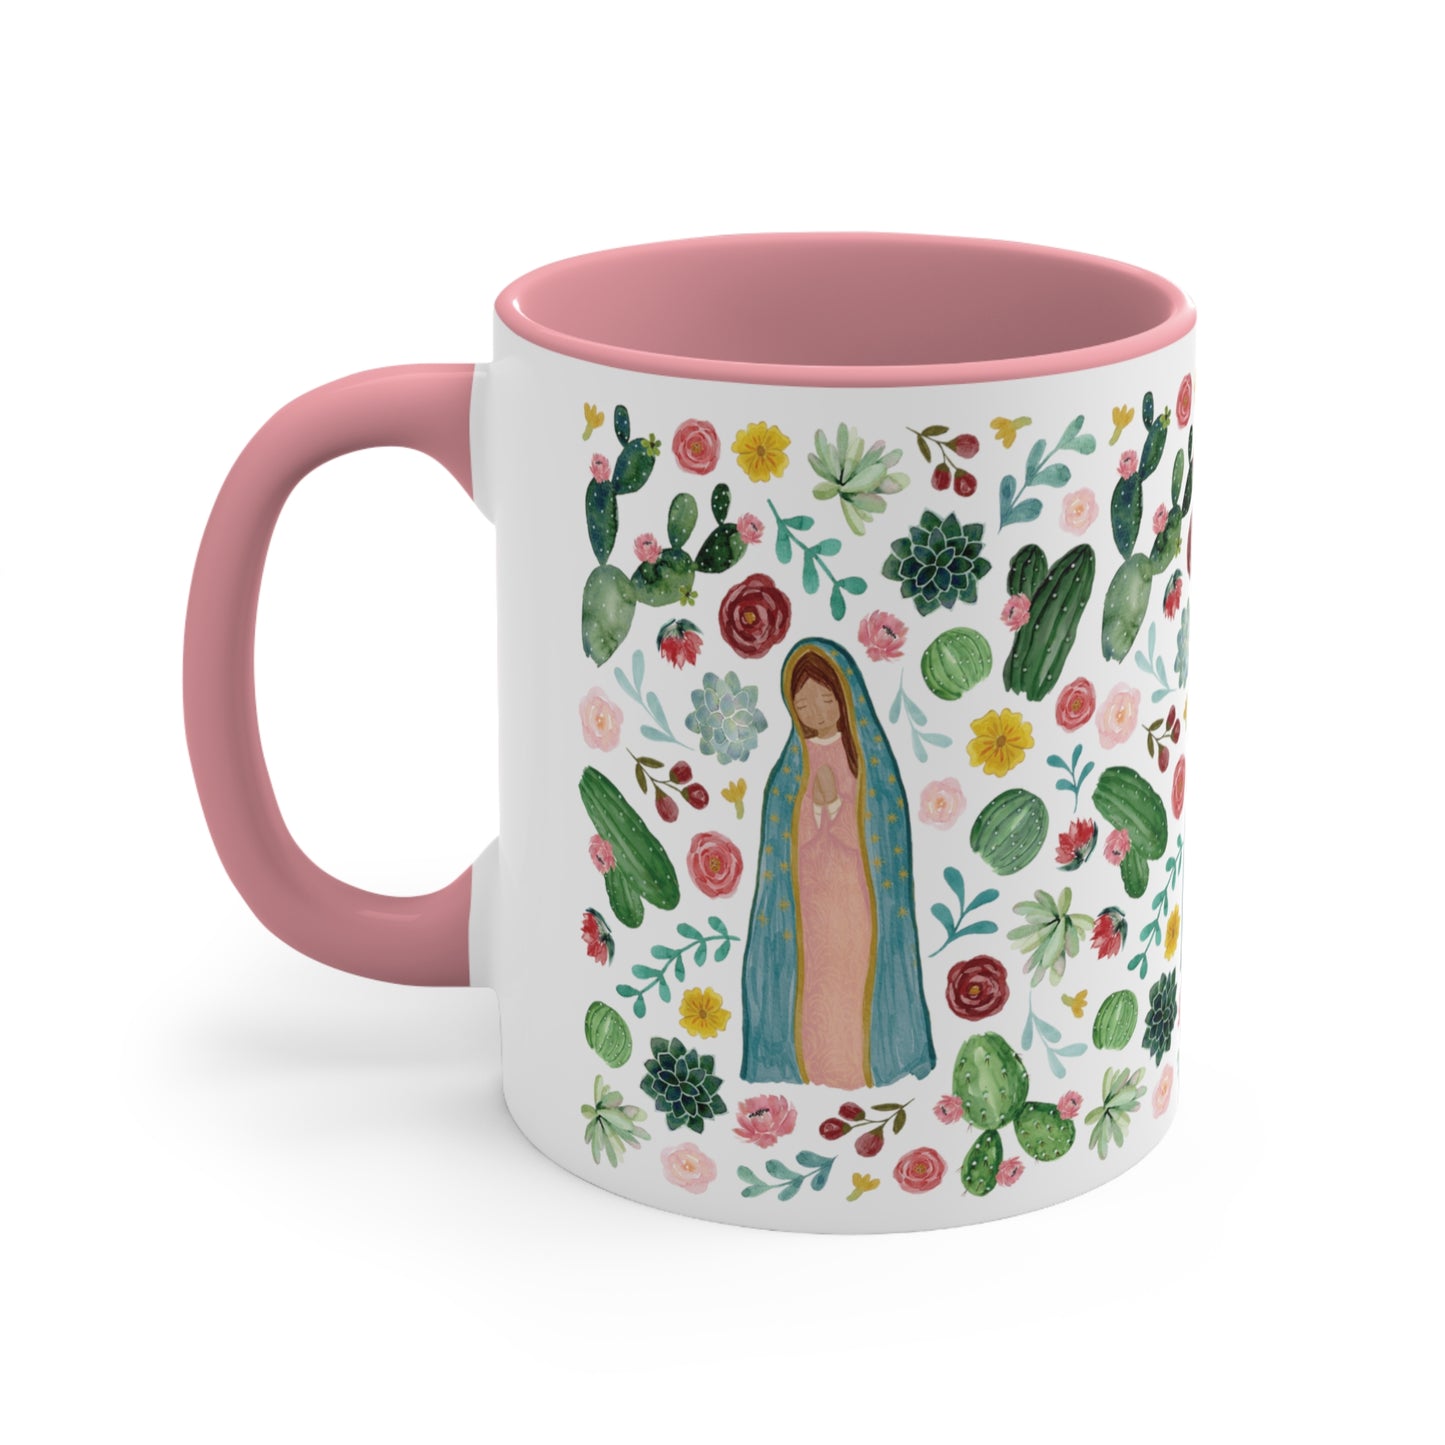 Virgencita de Guadalupe Coffee Mug, 11oz. Flowers and lady Guadalupe ceramic cup for her.